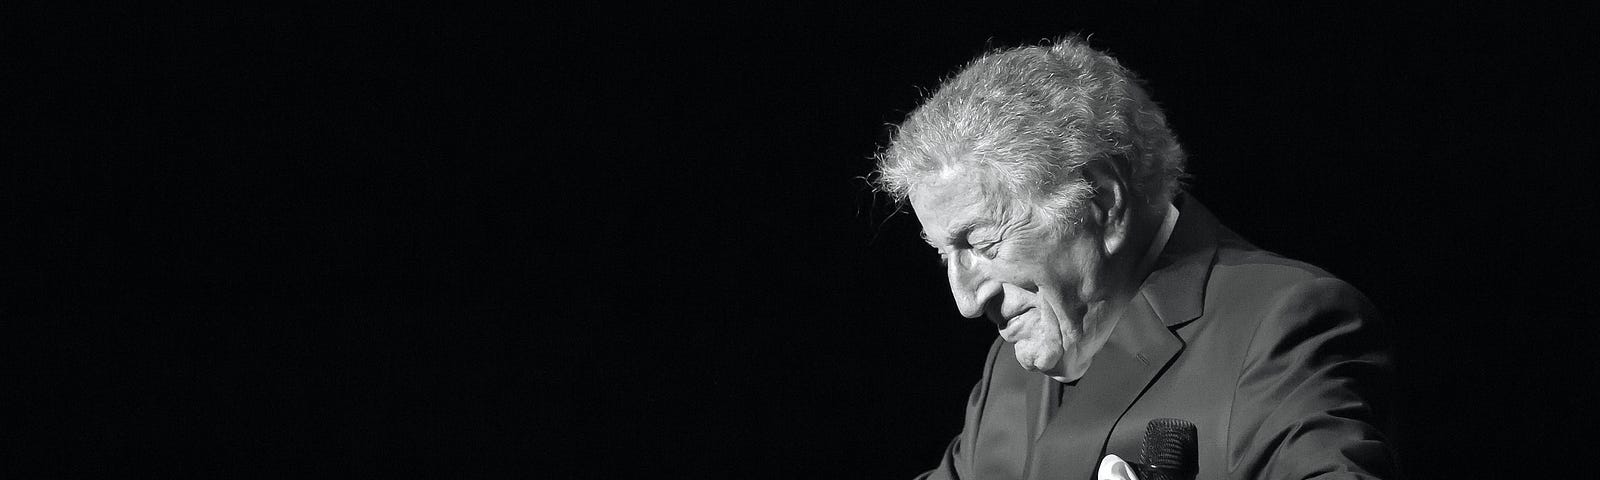 Tony Bennett at the State Theater in 2016. Image by Andy Witchger via Wikimedia Commons. He sang ‘Because of You’ days before he died at age 96: The music never left Tony Bennett, even after years of Alzheimer’s, so the music never left him.